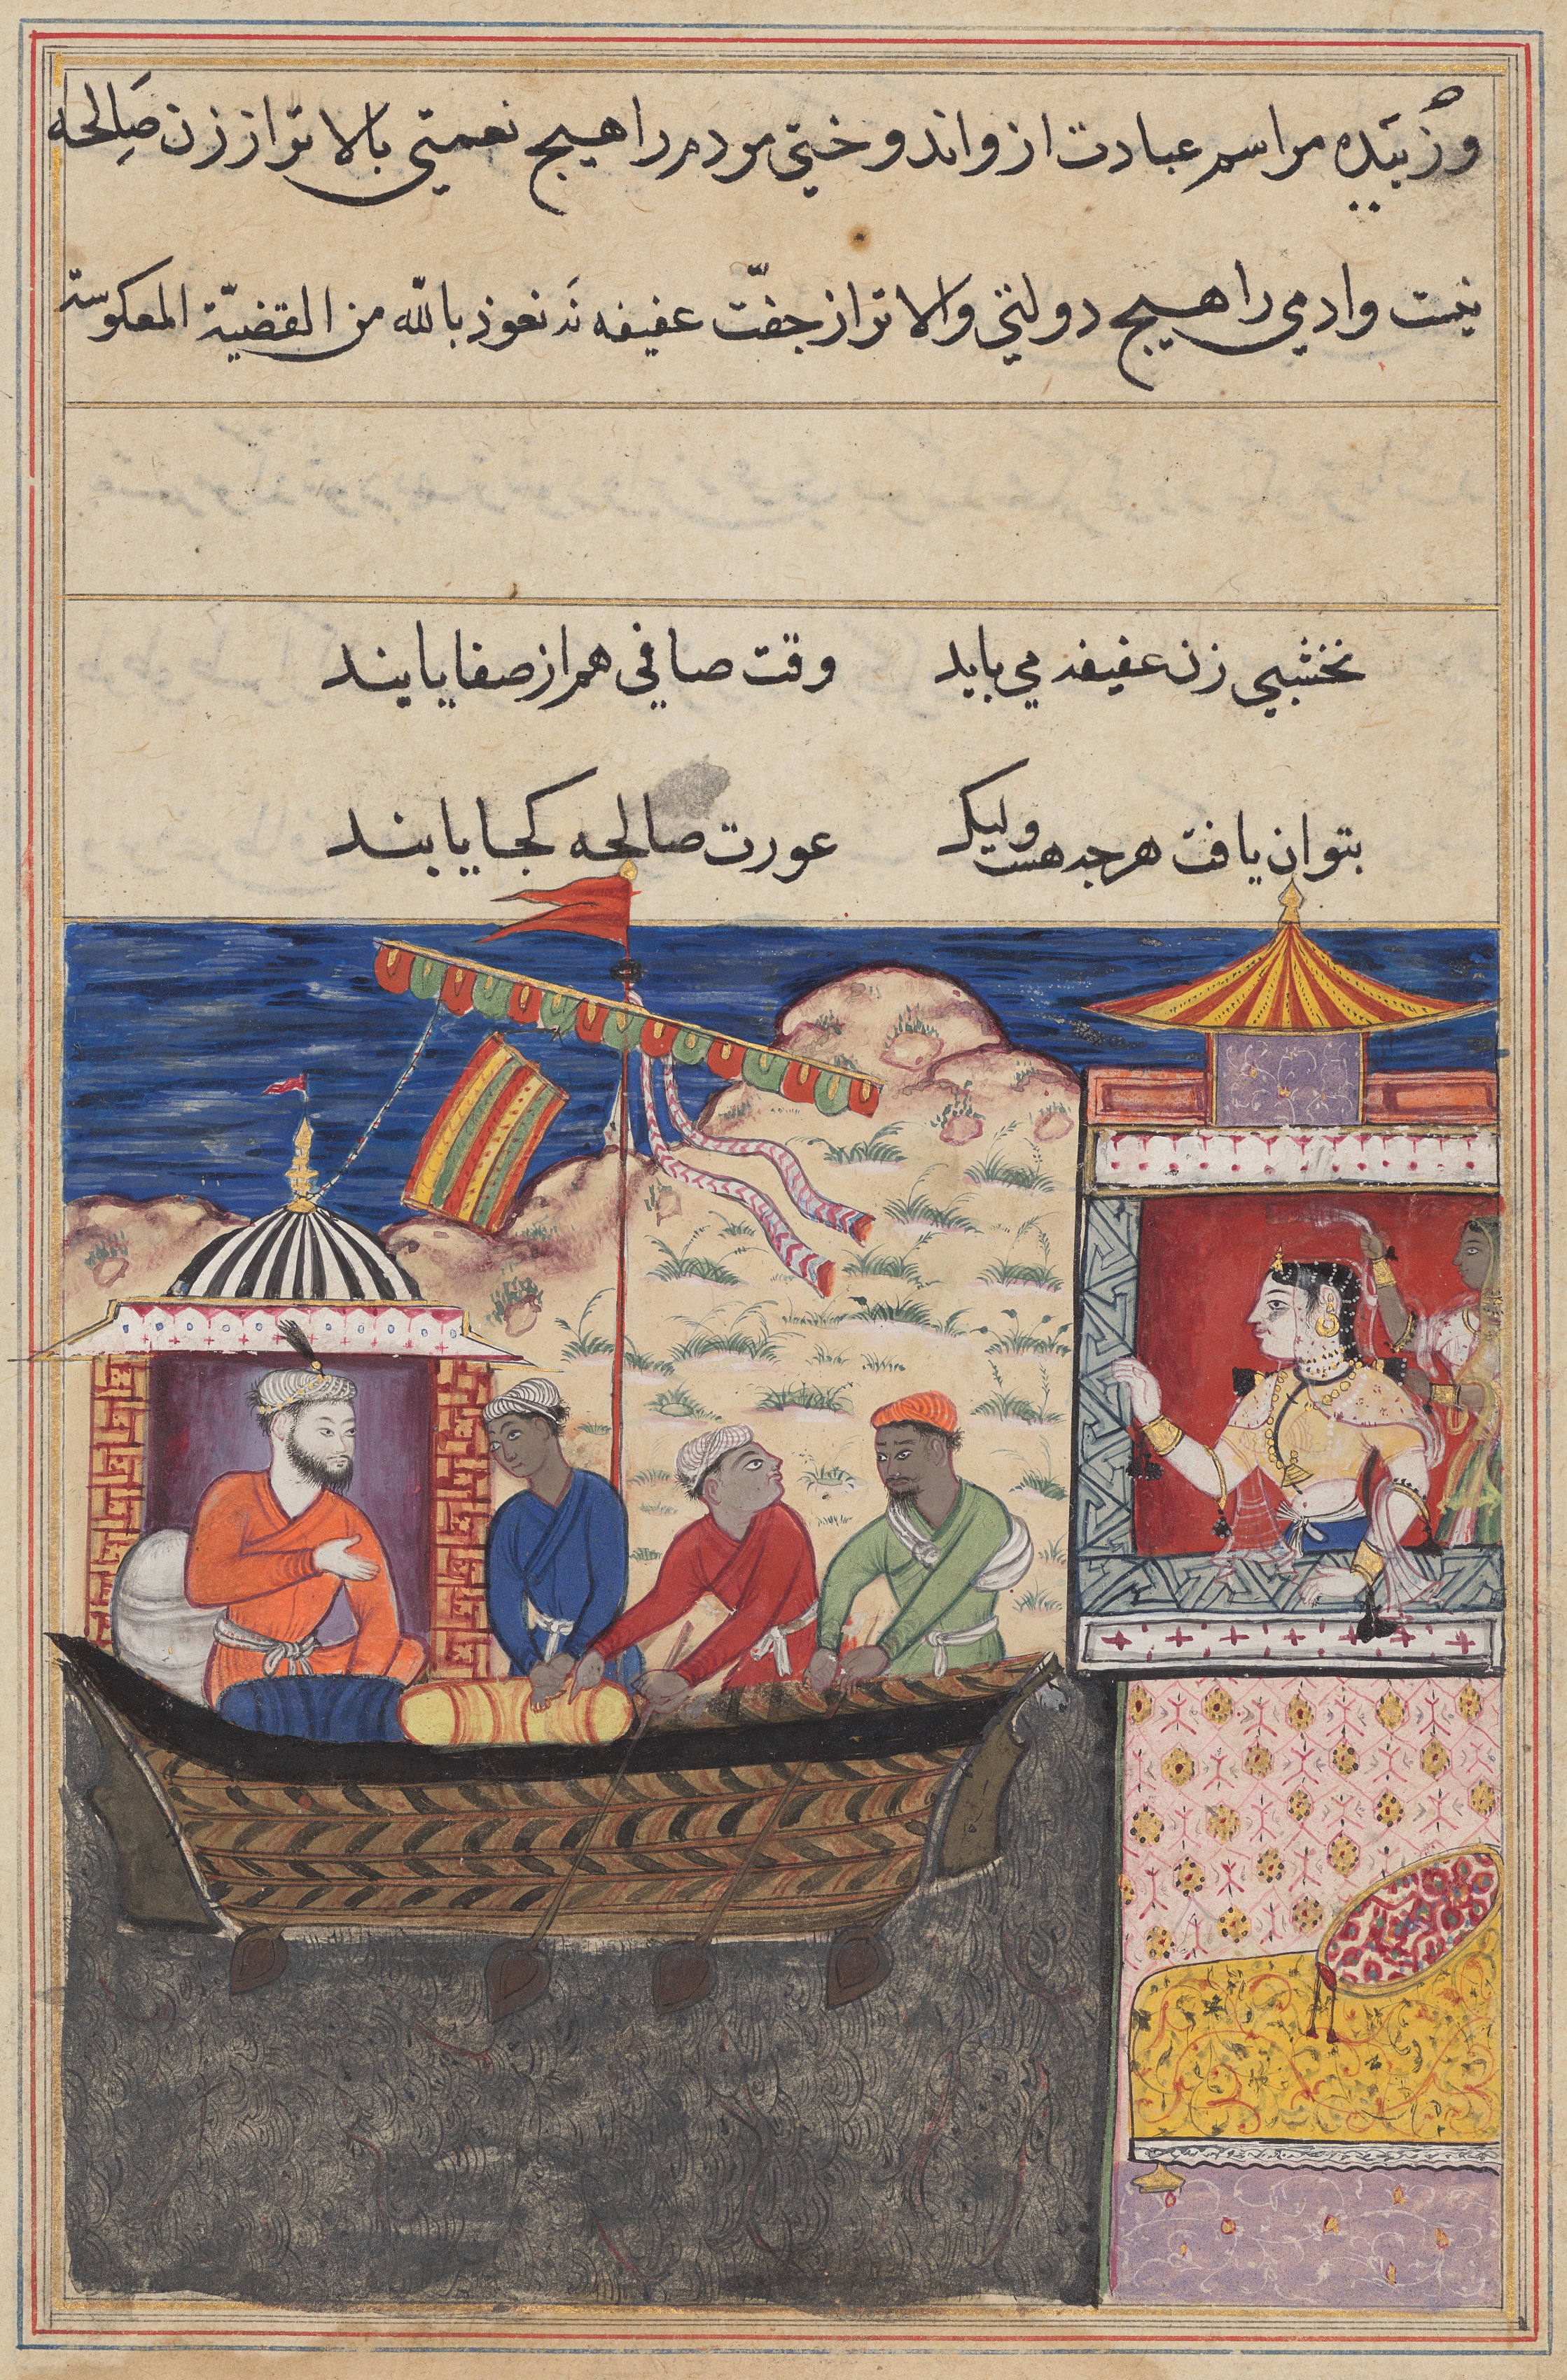 The merchant Mansur departs on a sea voyage, leaving his wife behind, from a Tuti-nama (Tales of a Parrot): Seventeenth Night